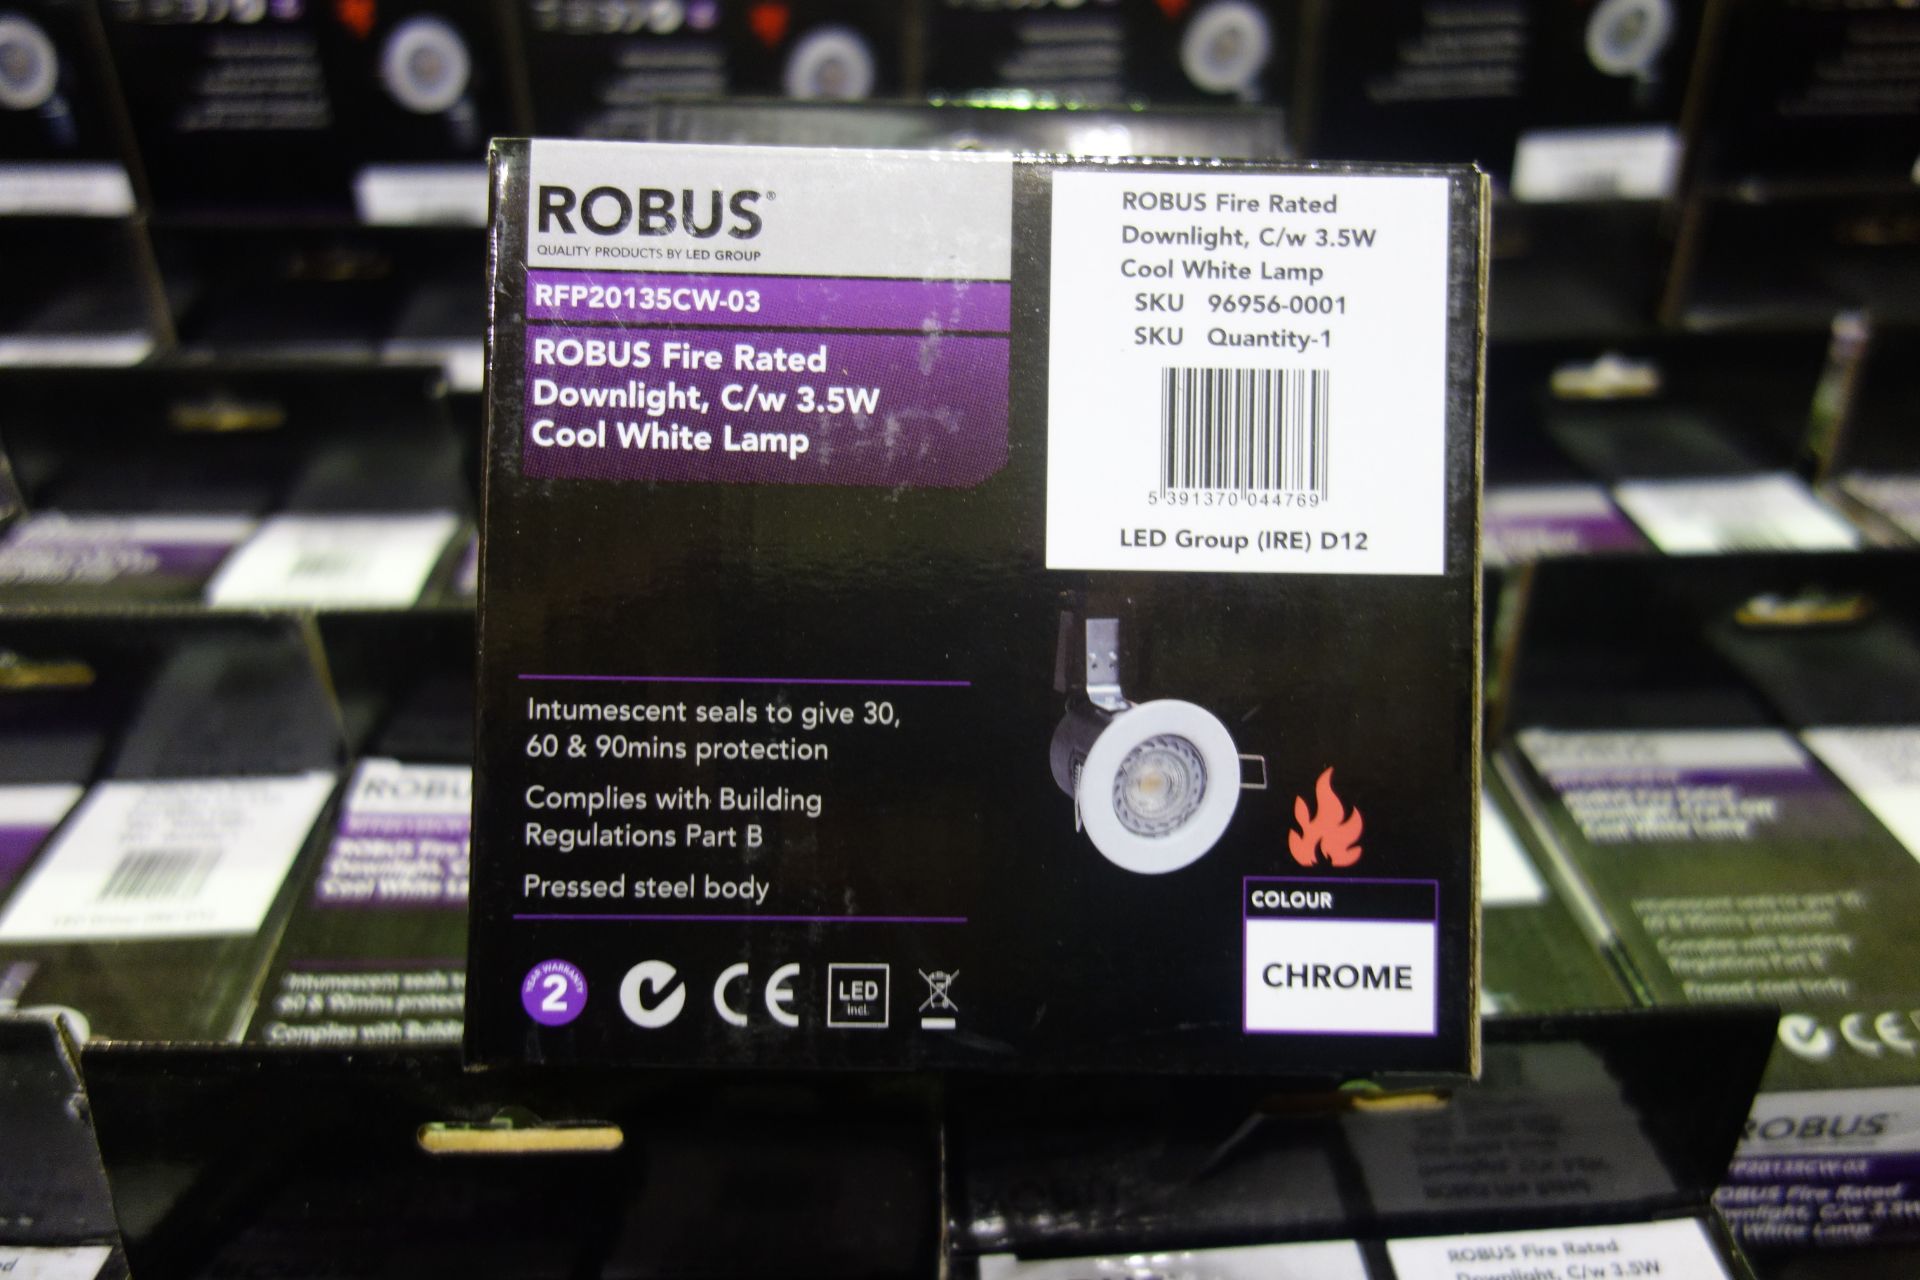 40 X Robus RFP20135CW-03 Fire Rated Downlights C/W 3.5 W Cool White LED Lamp Chrome Finish